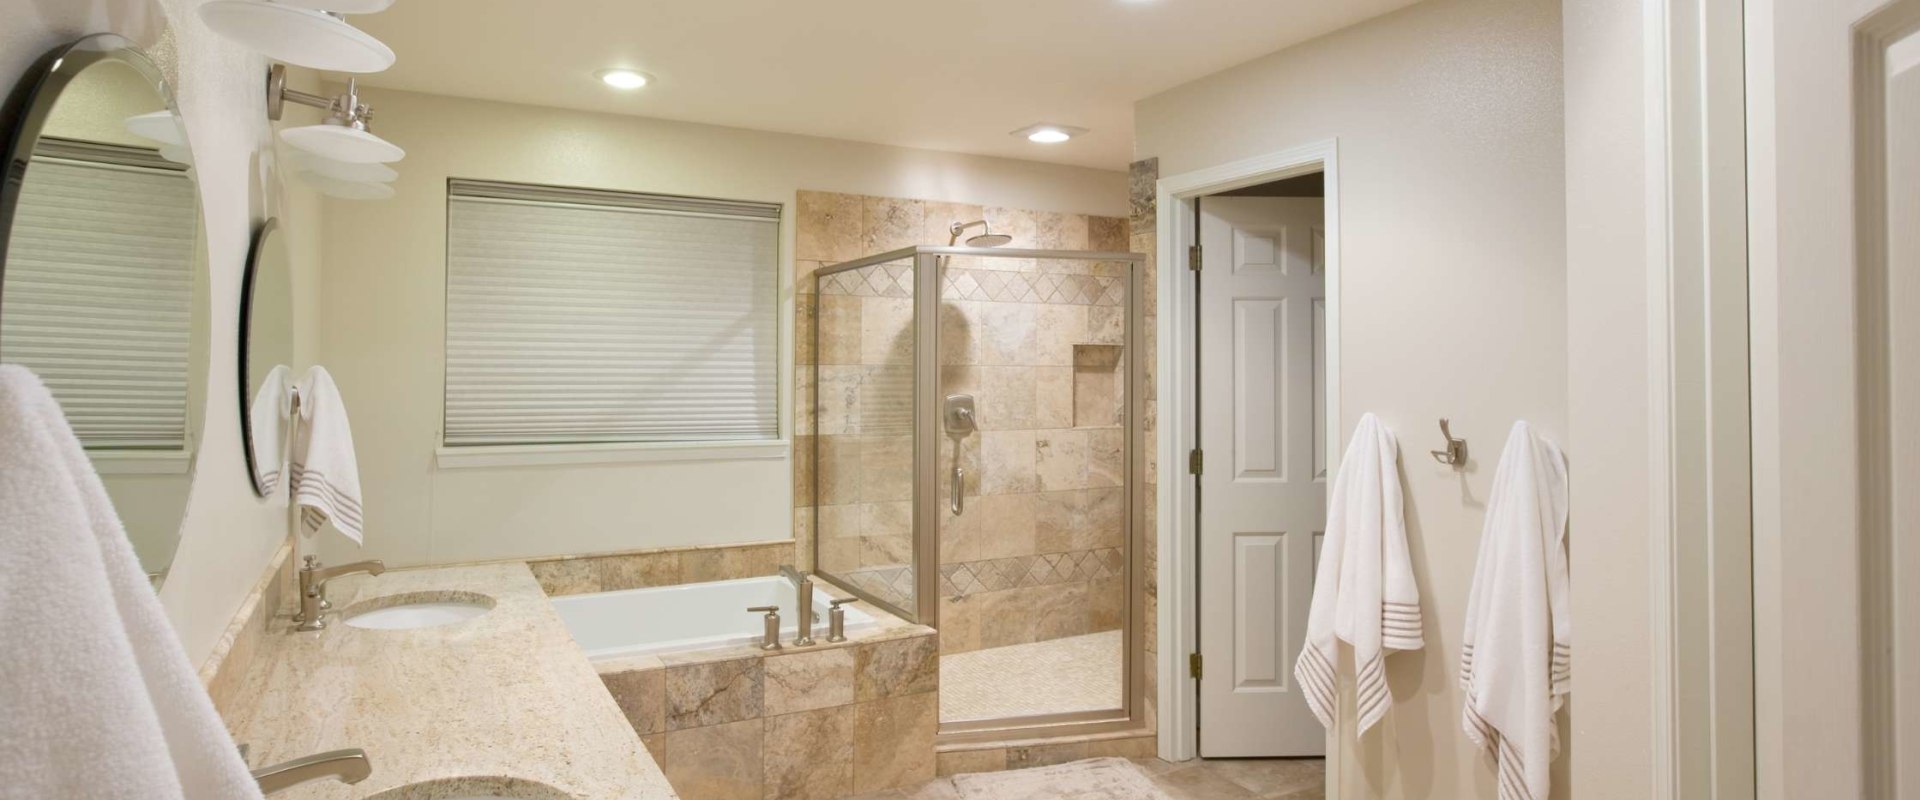 Bathroom Remodels and Renovations: Transforming Your Home